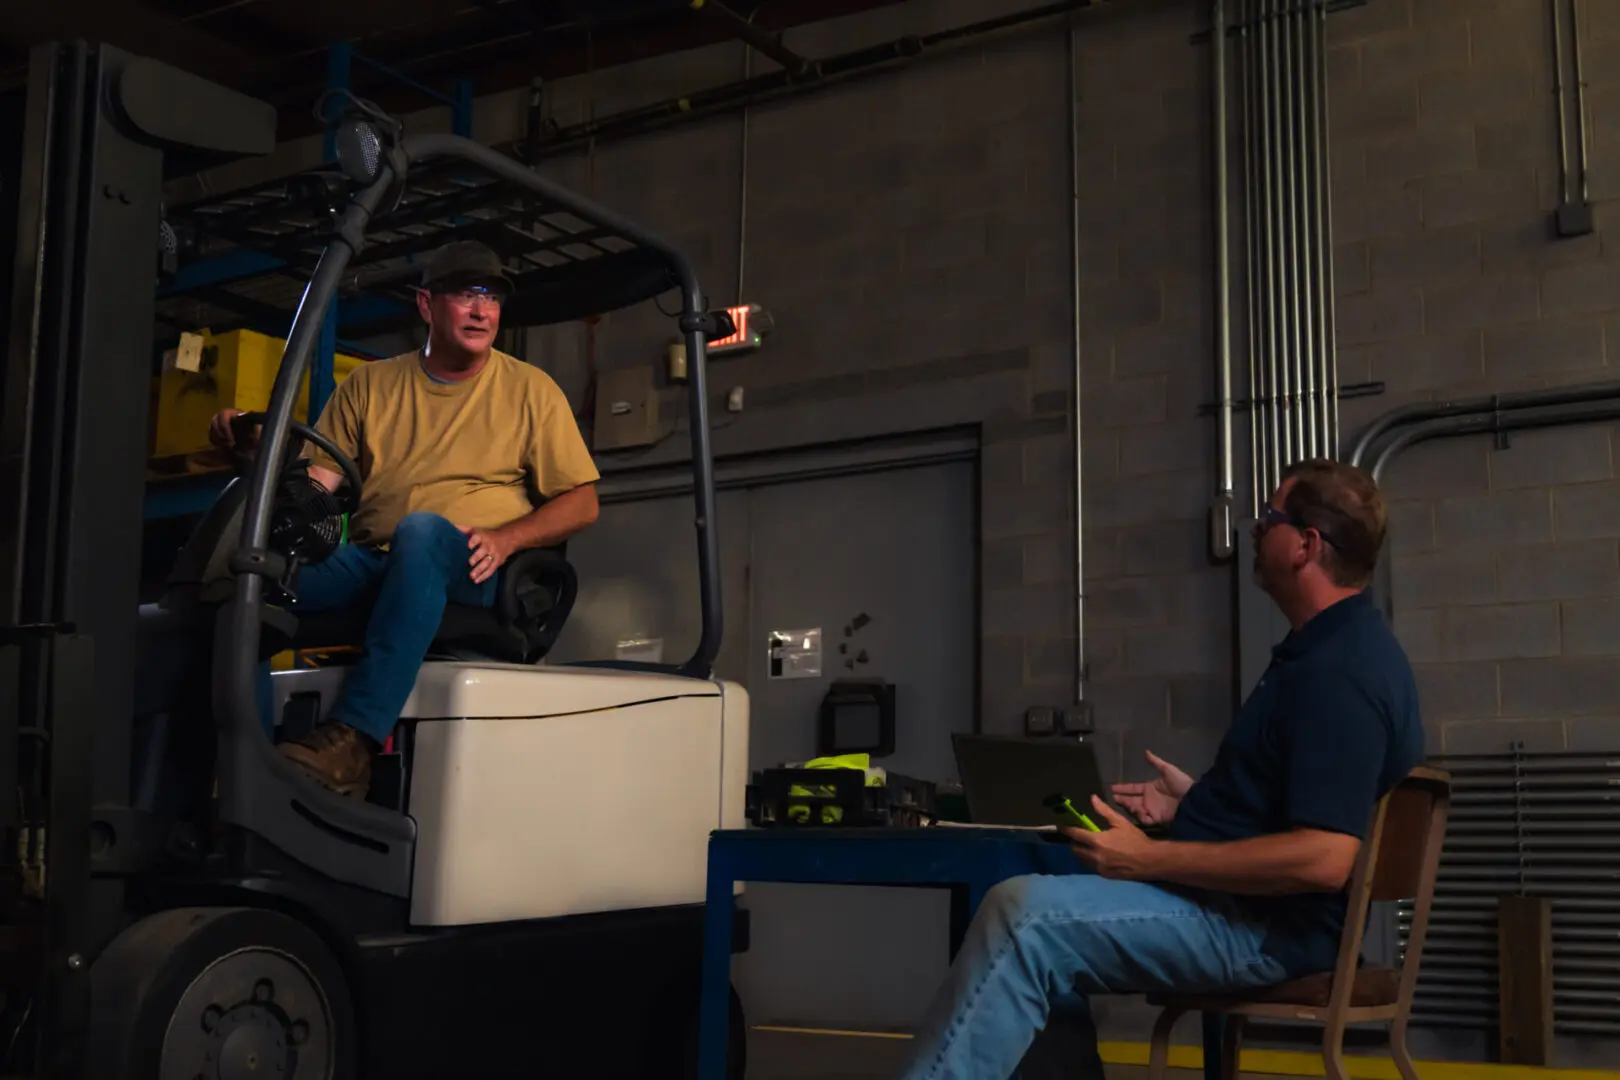 Two men sitting on a forklift in an industrial setting.